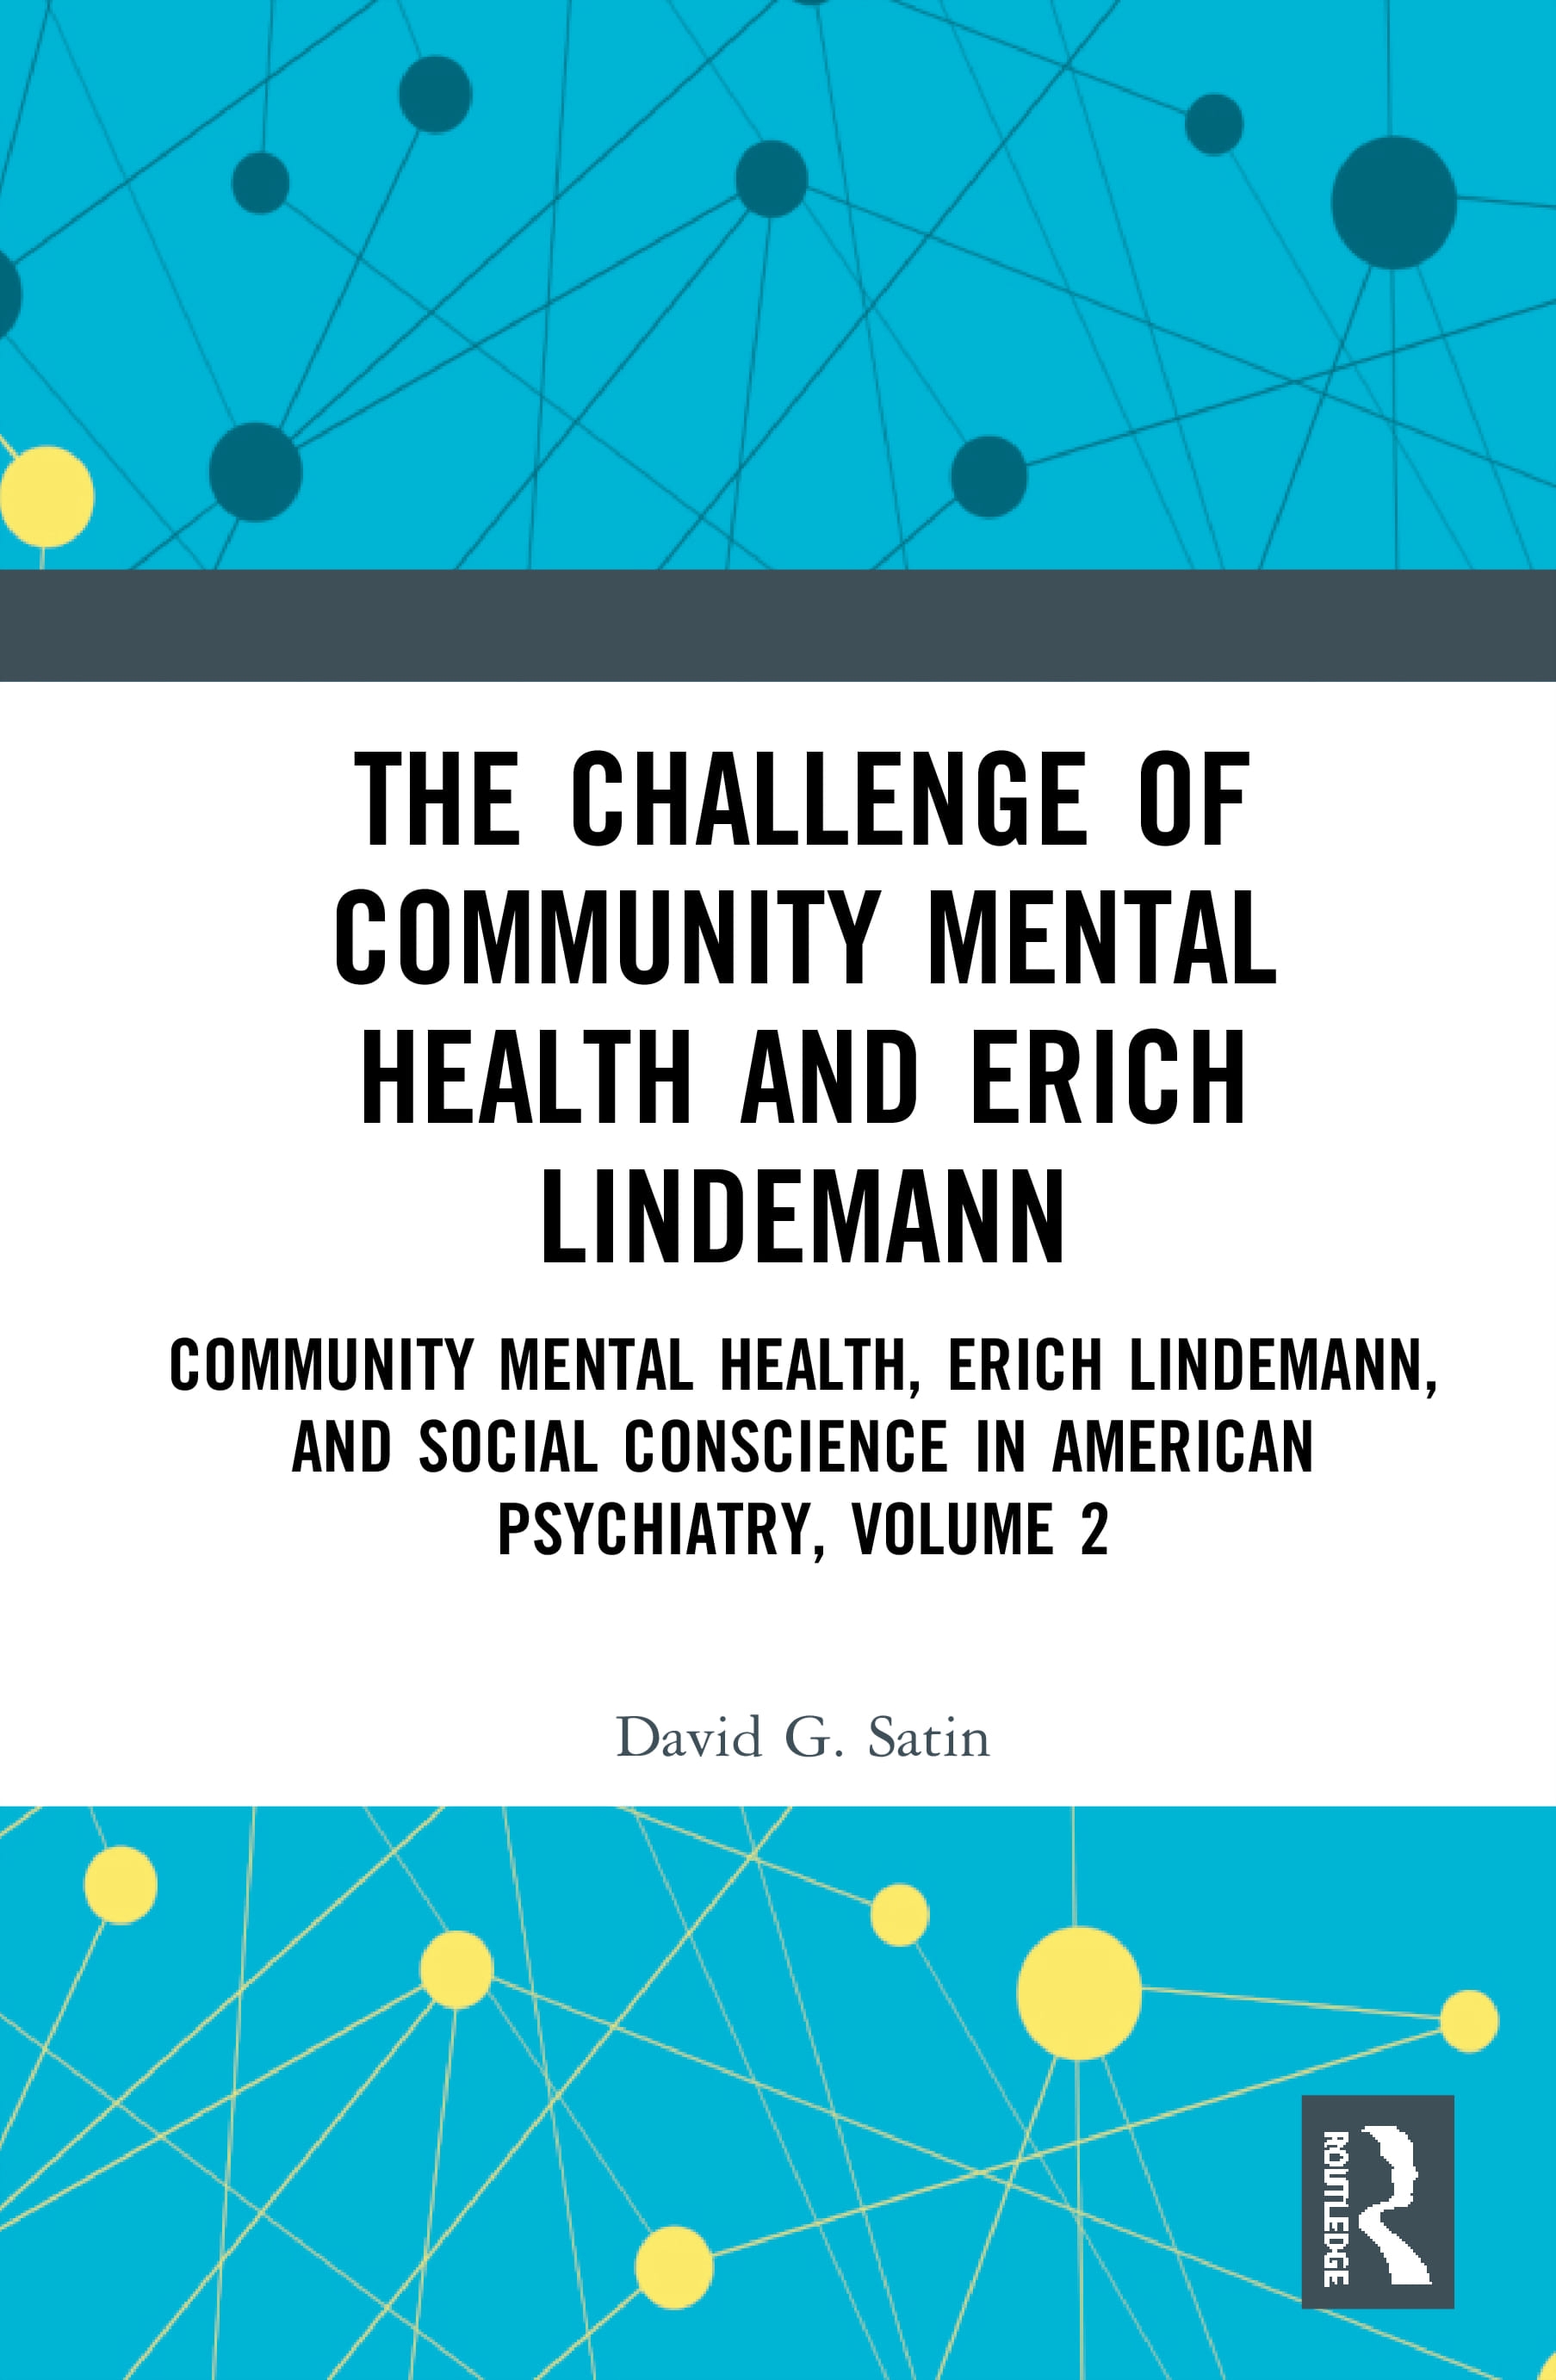 The Challenge of Community Mental Health and Erich Lindemann: Community Mental Health, Erich Lindemann, and Social Conscience in American Psychiatry,